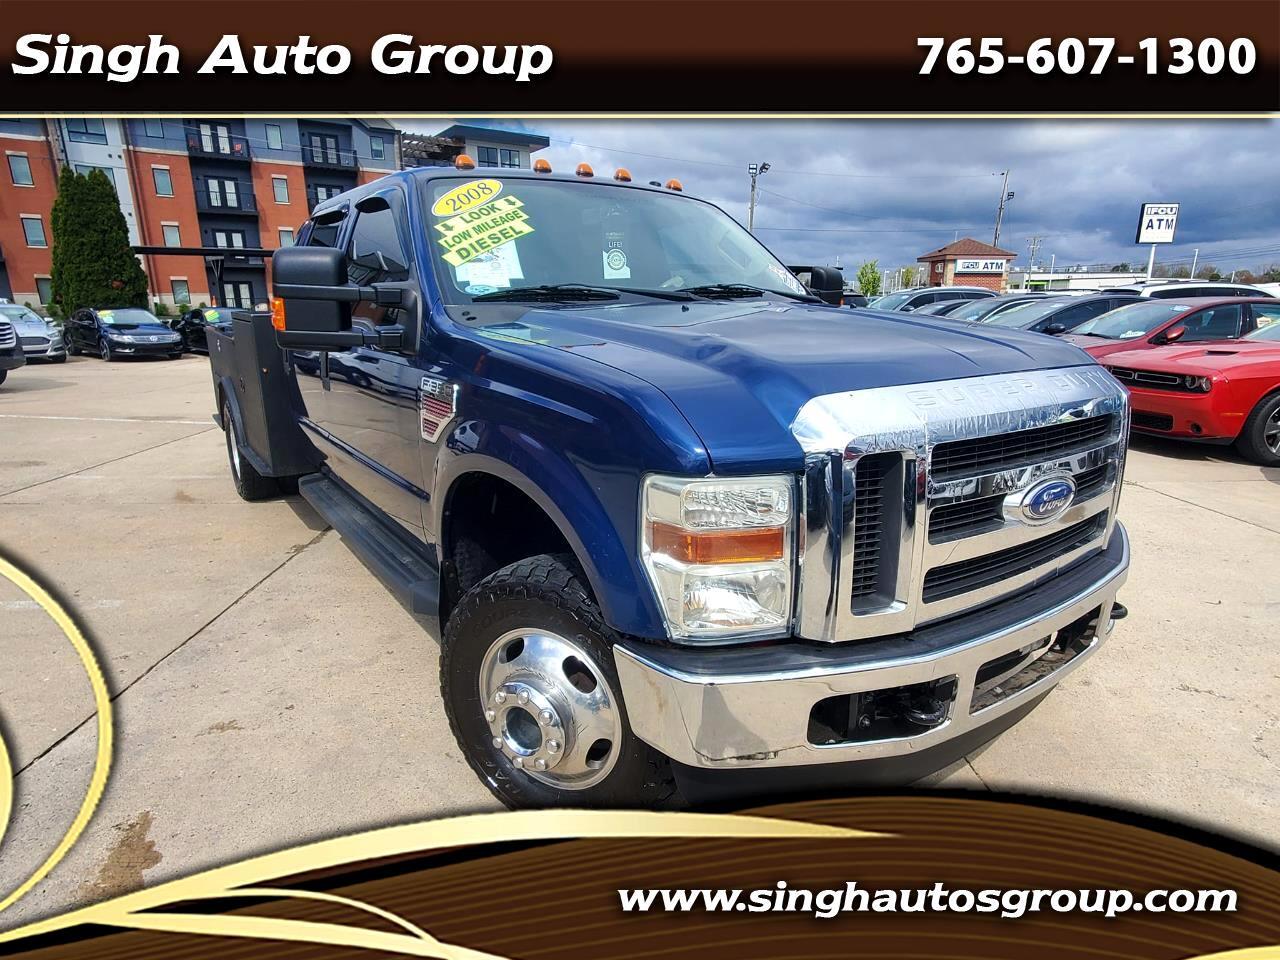 2008 Ford F-350 SD XLT Crew Cab Long Bed DRW 4WD